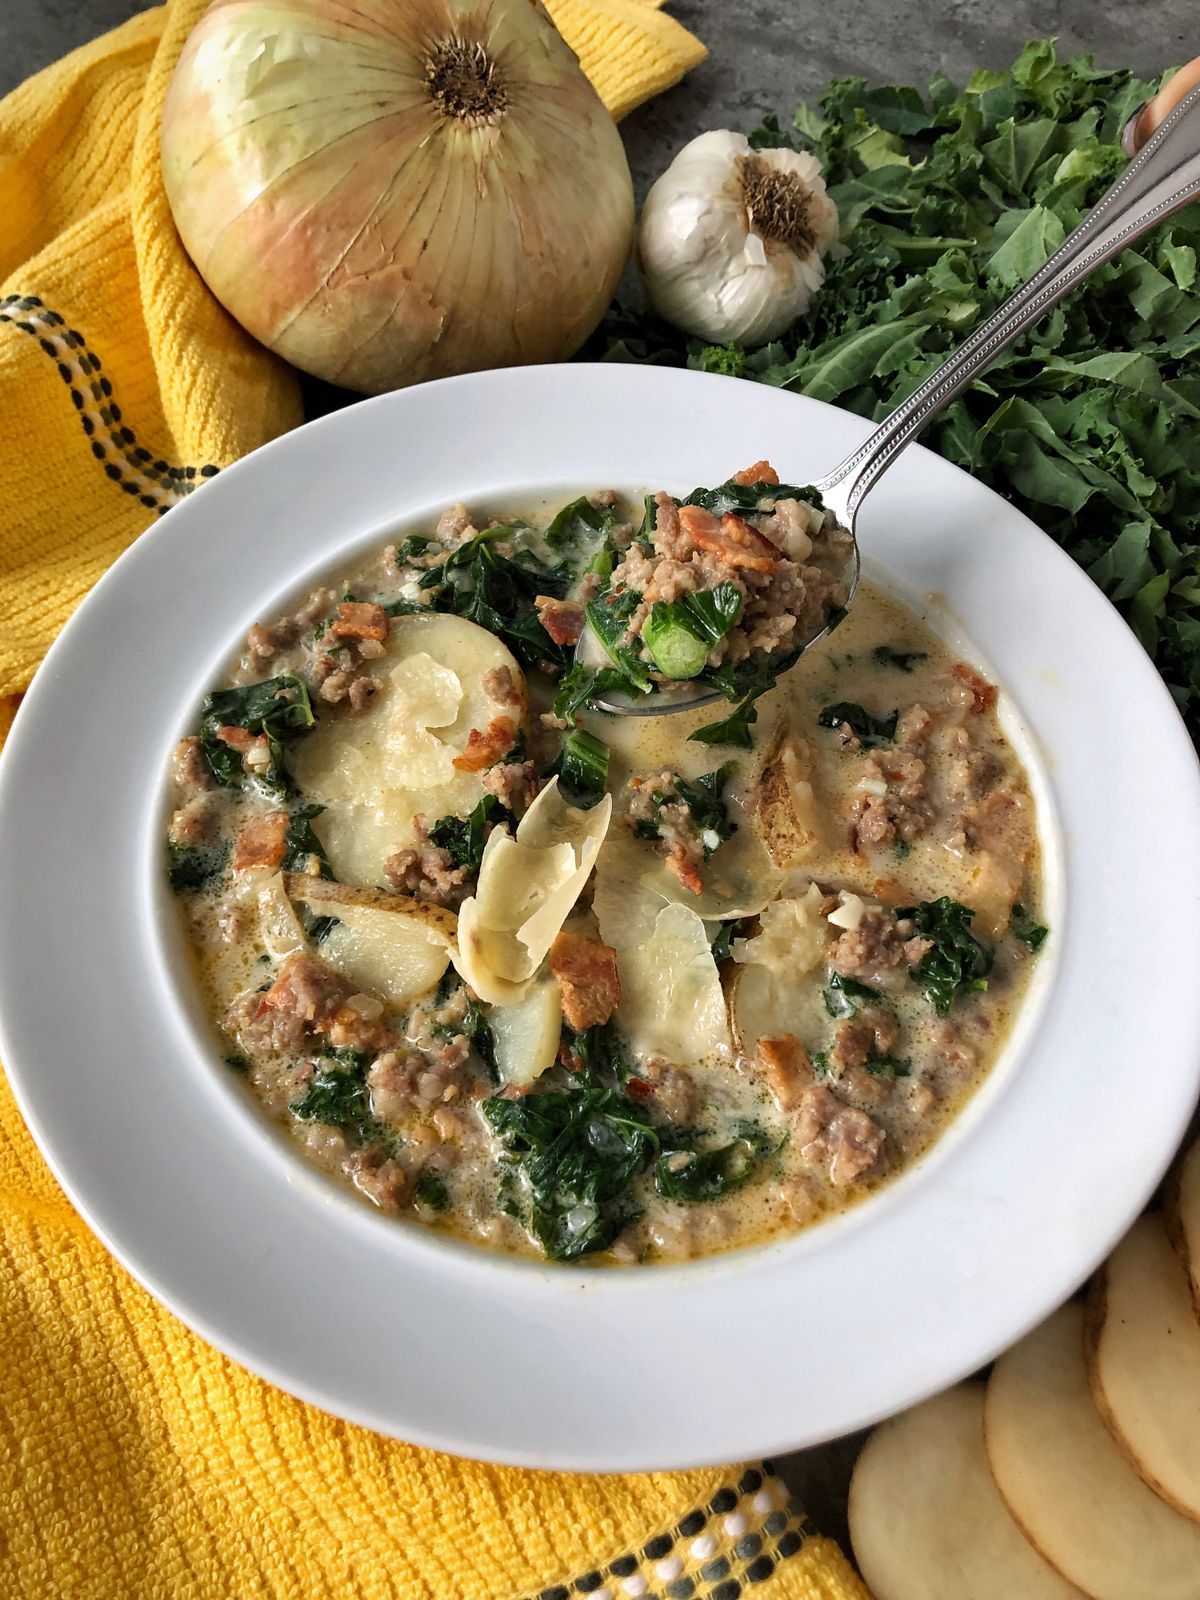 Ingredients for this zuppa toscana soup include hot Italian sausage, crisp bacon bits, tender rounds of potatoes and fresh kale.  (Audrey Alfaro/For The Spokesman-Review)